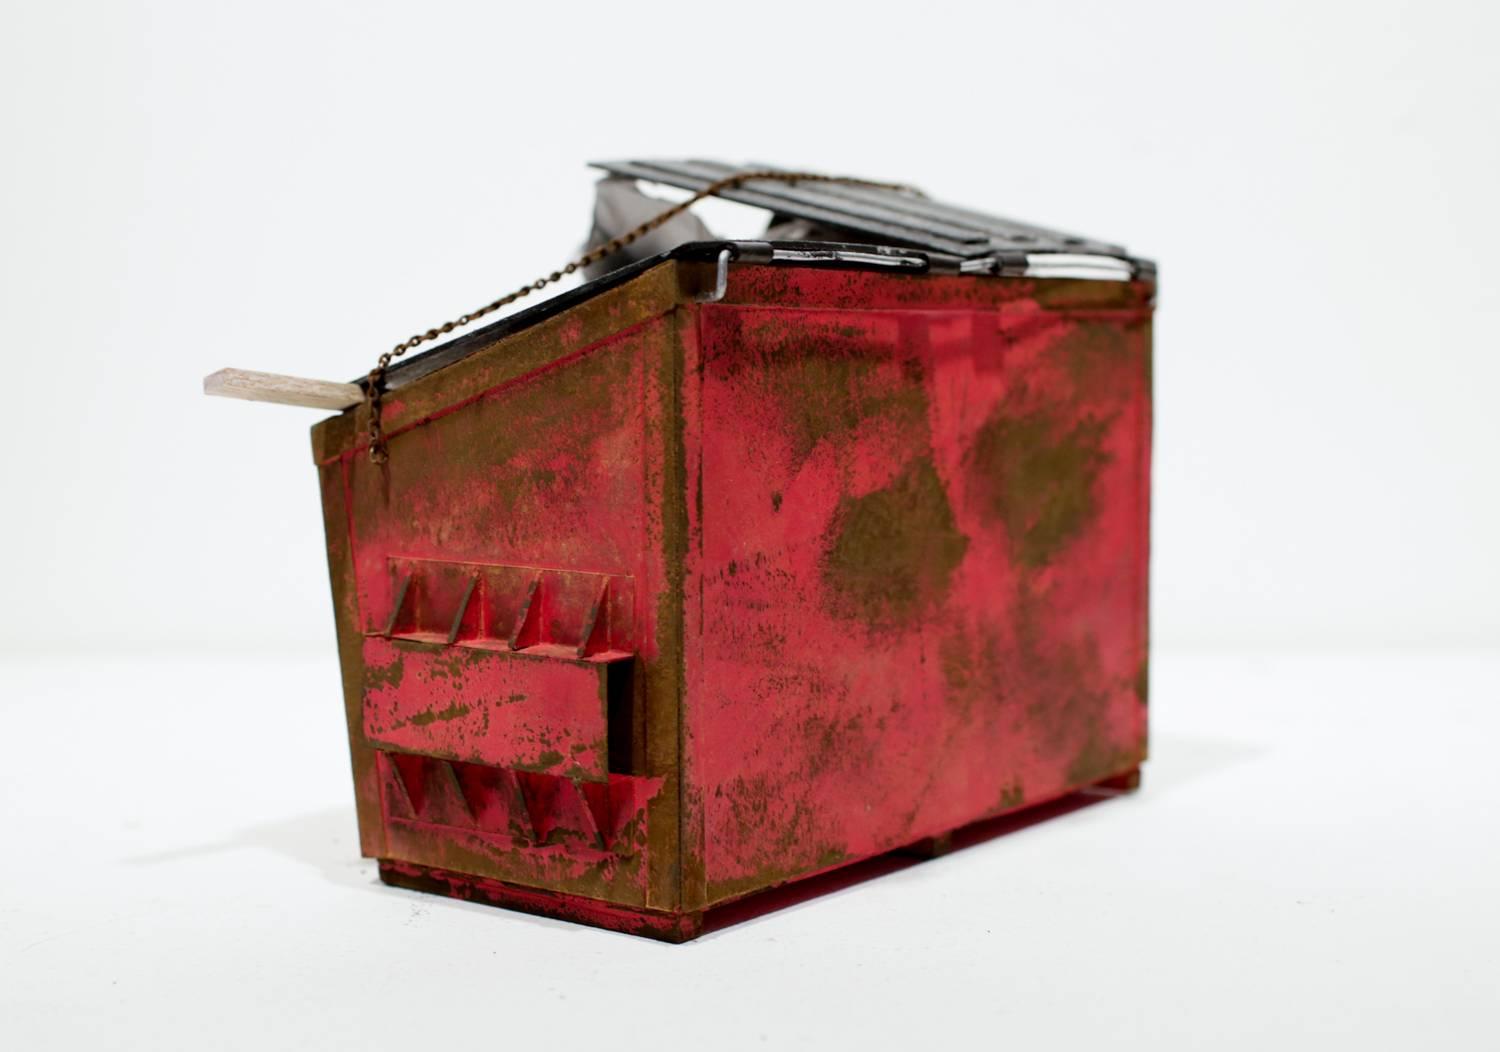 Original miniature dumpster paper sculpture by Drew Leshko measuring 5”h x 6.75”w x 4”d.

About the Artist // Drew Leshko is a Philadelphia, Pennsylvania-based artist. Working from observation and photographs, the artist painstakingly recreates